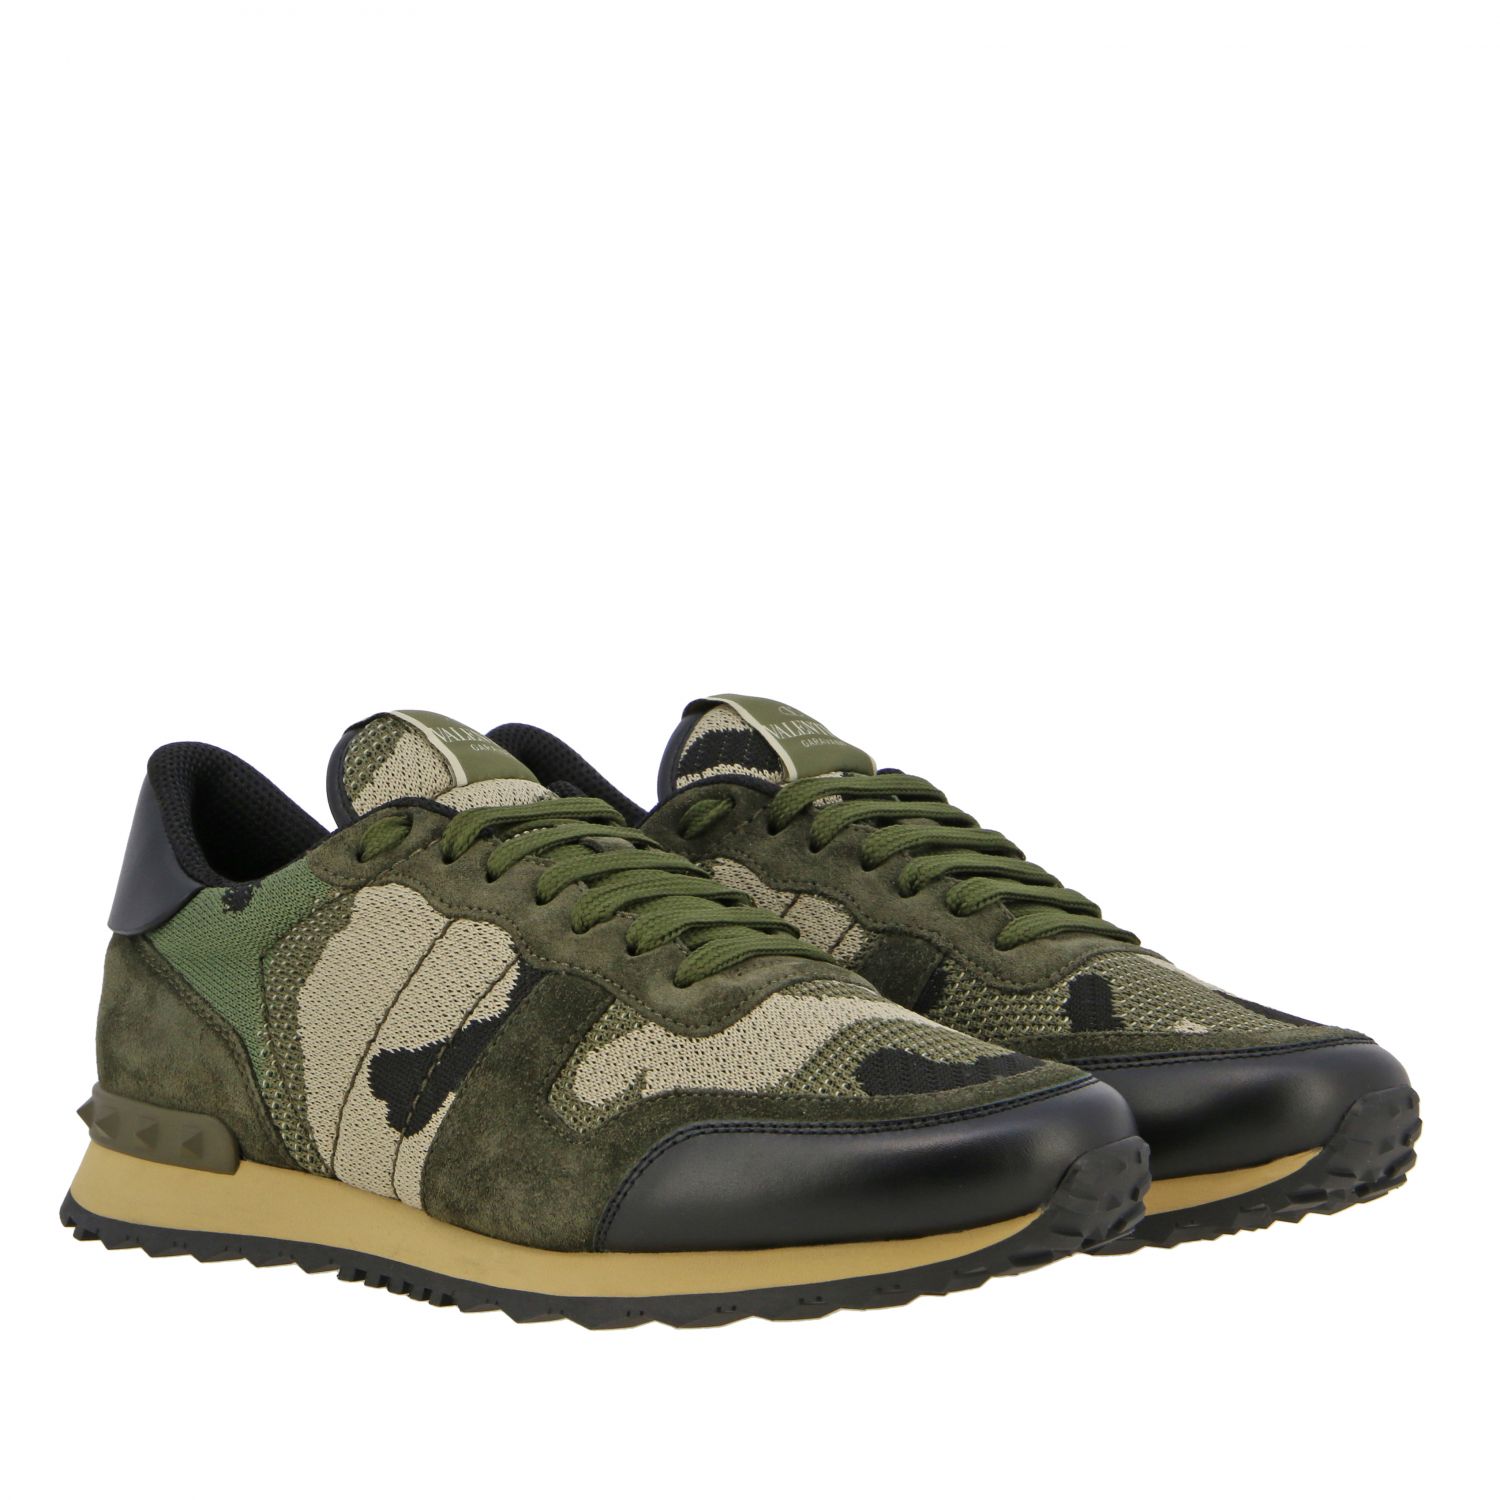 green valentino trainers outlet store 